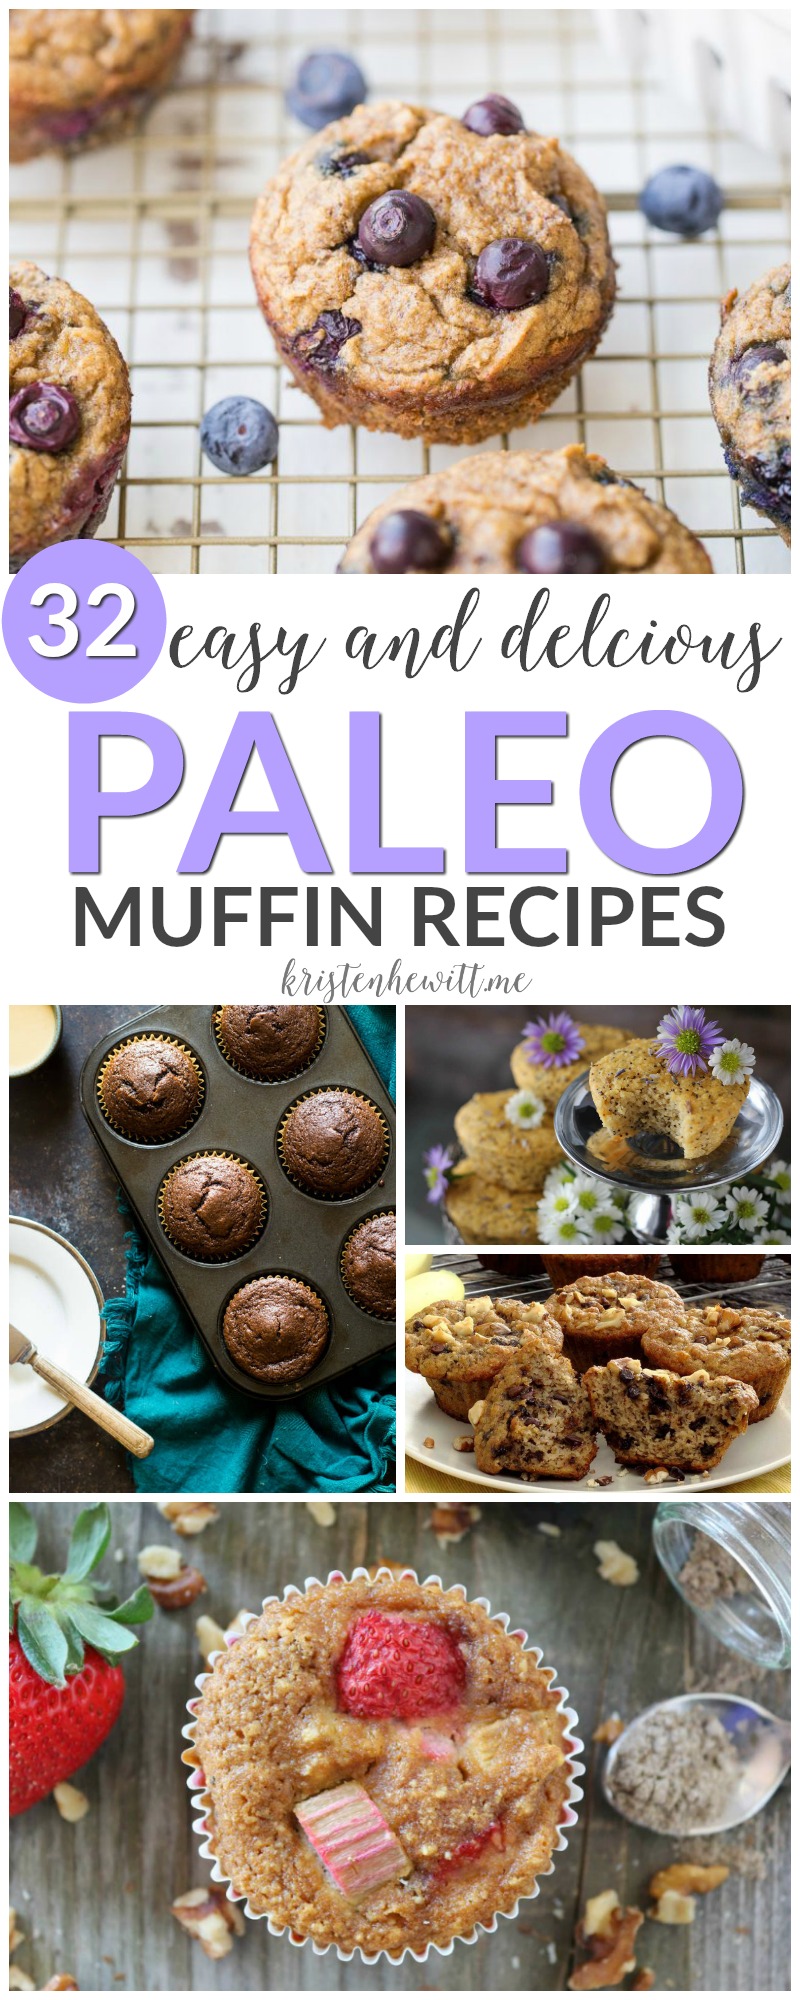 Looking for a snack that's healthy and filling? Try one of these 32 DELISH paleo muffins! So easy to whip up and freeze for later.